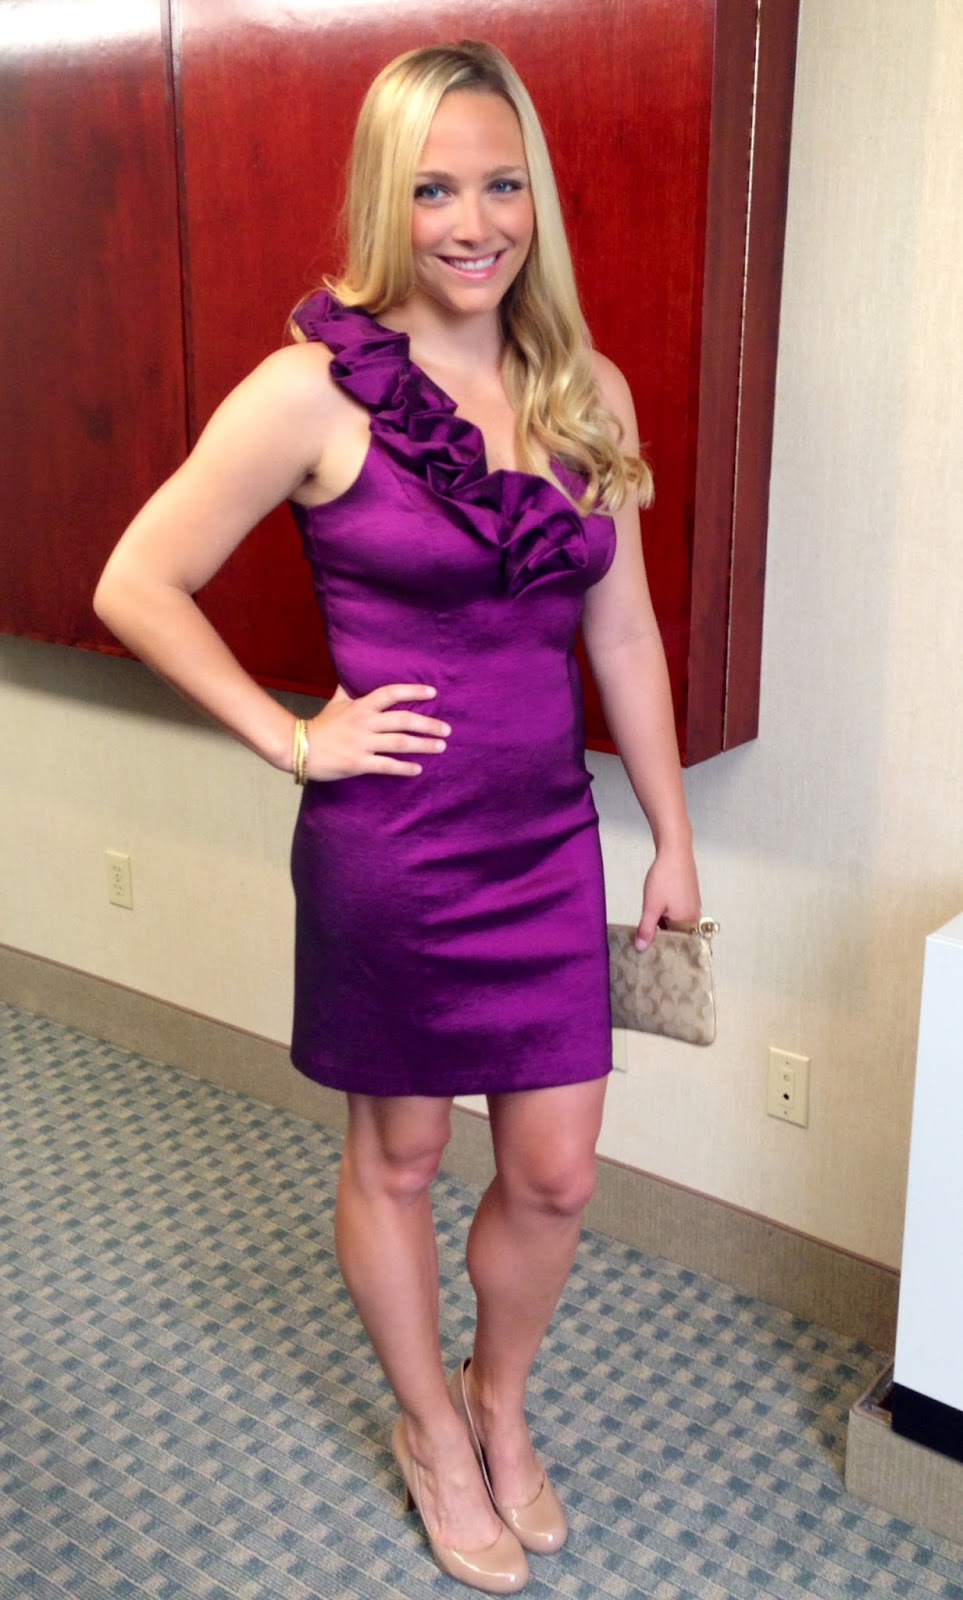 Casey poses in an elegant purple dress before attending a wedding. 